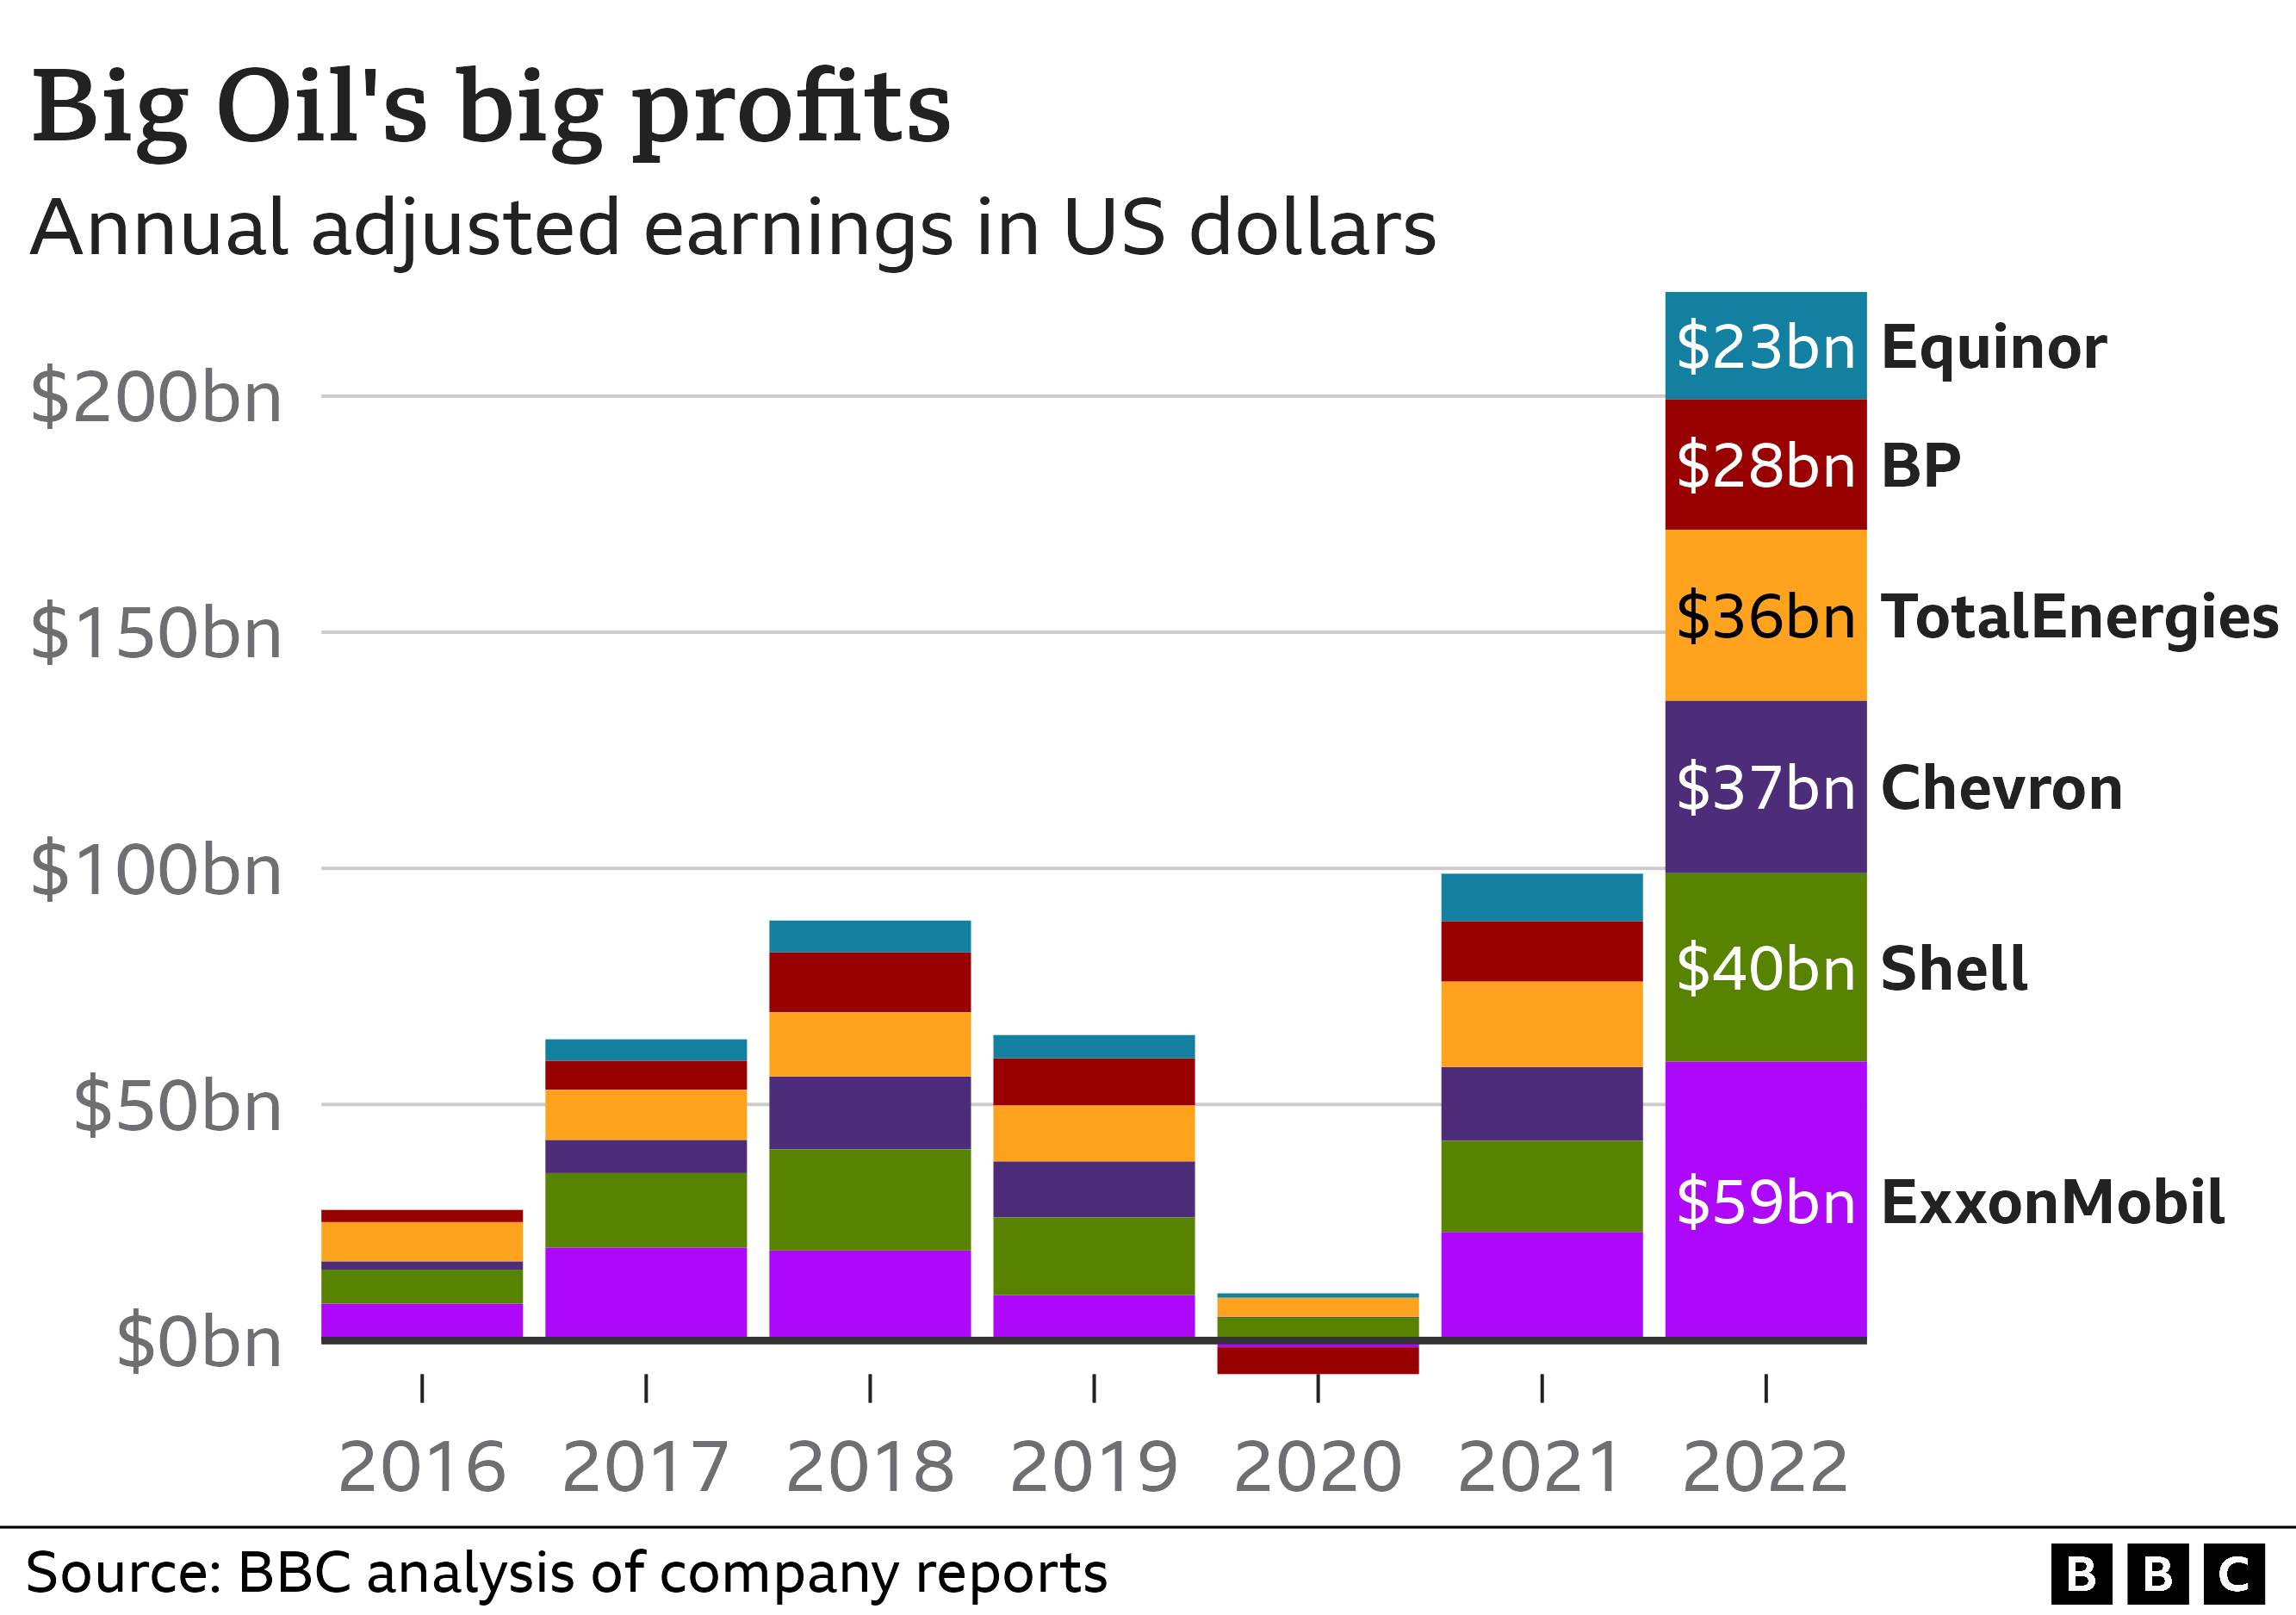 The bar chart shows the combined earnings of the major oil companies. They reach $222 billion by 2022, more than double the previous year.